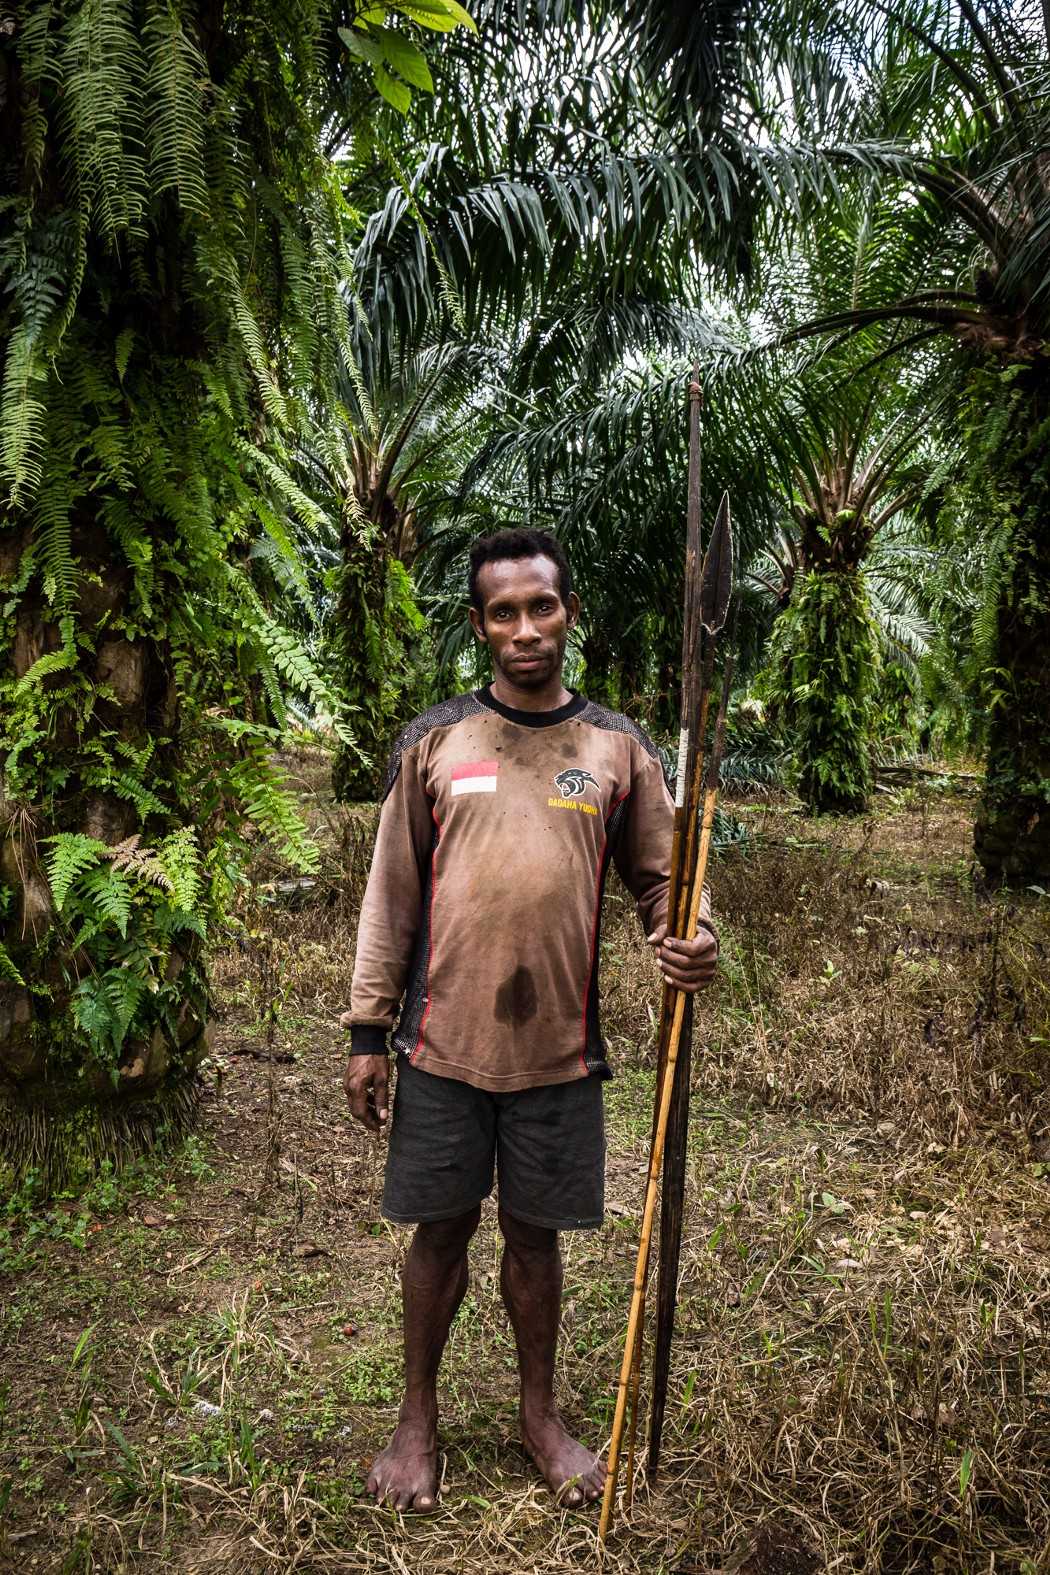 Tadius Butipo, 30, works in an oil palm plantation in southern Papua. By Albertus Vembrianto for The Gecko Project/Mongabay.